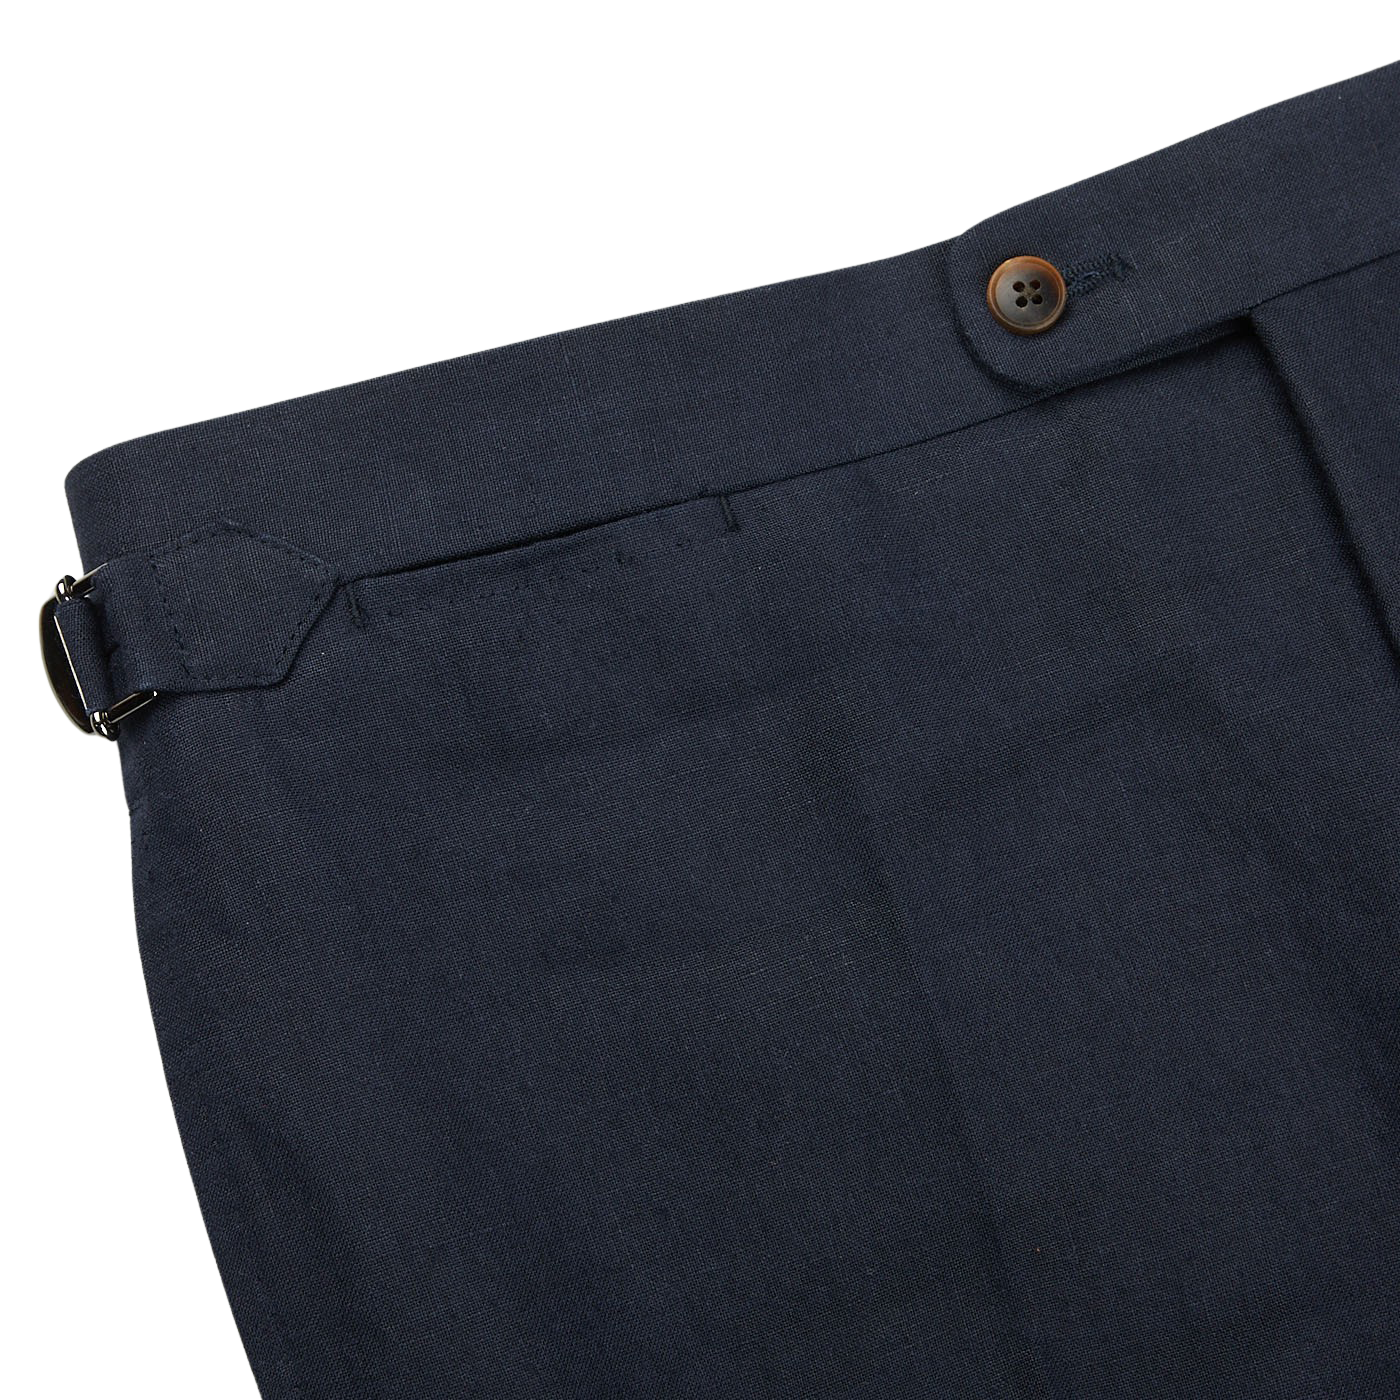 A close up view of Baltzar Sartorial navy blue pure linen flat front trousers.